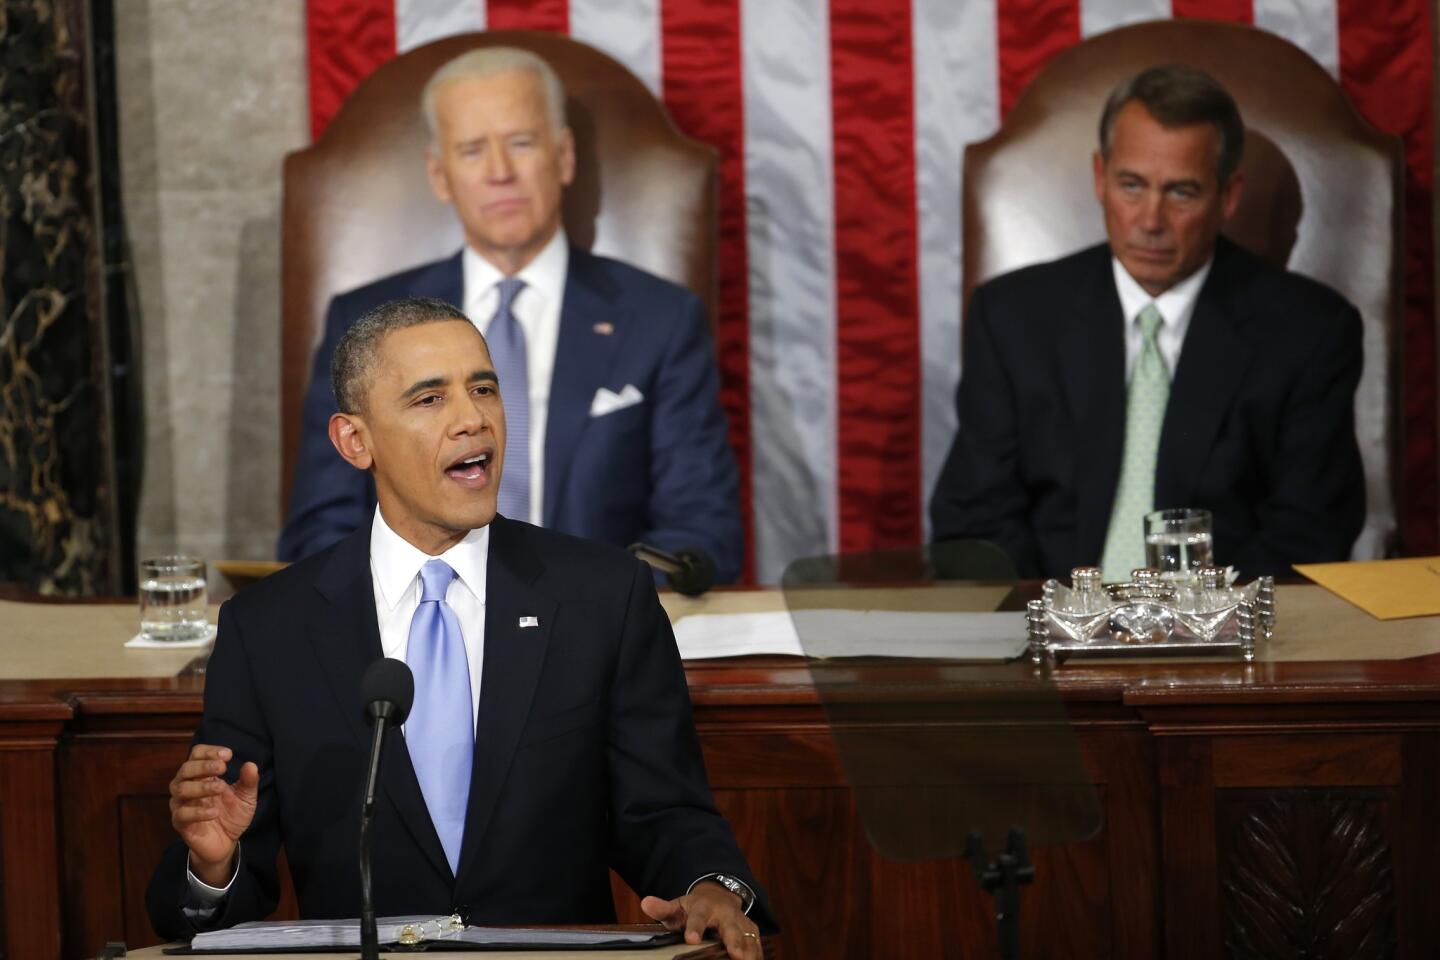 President Obama's State of the Union address